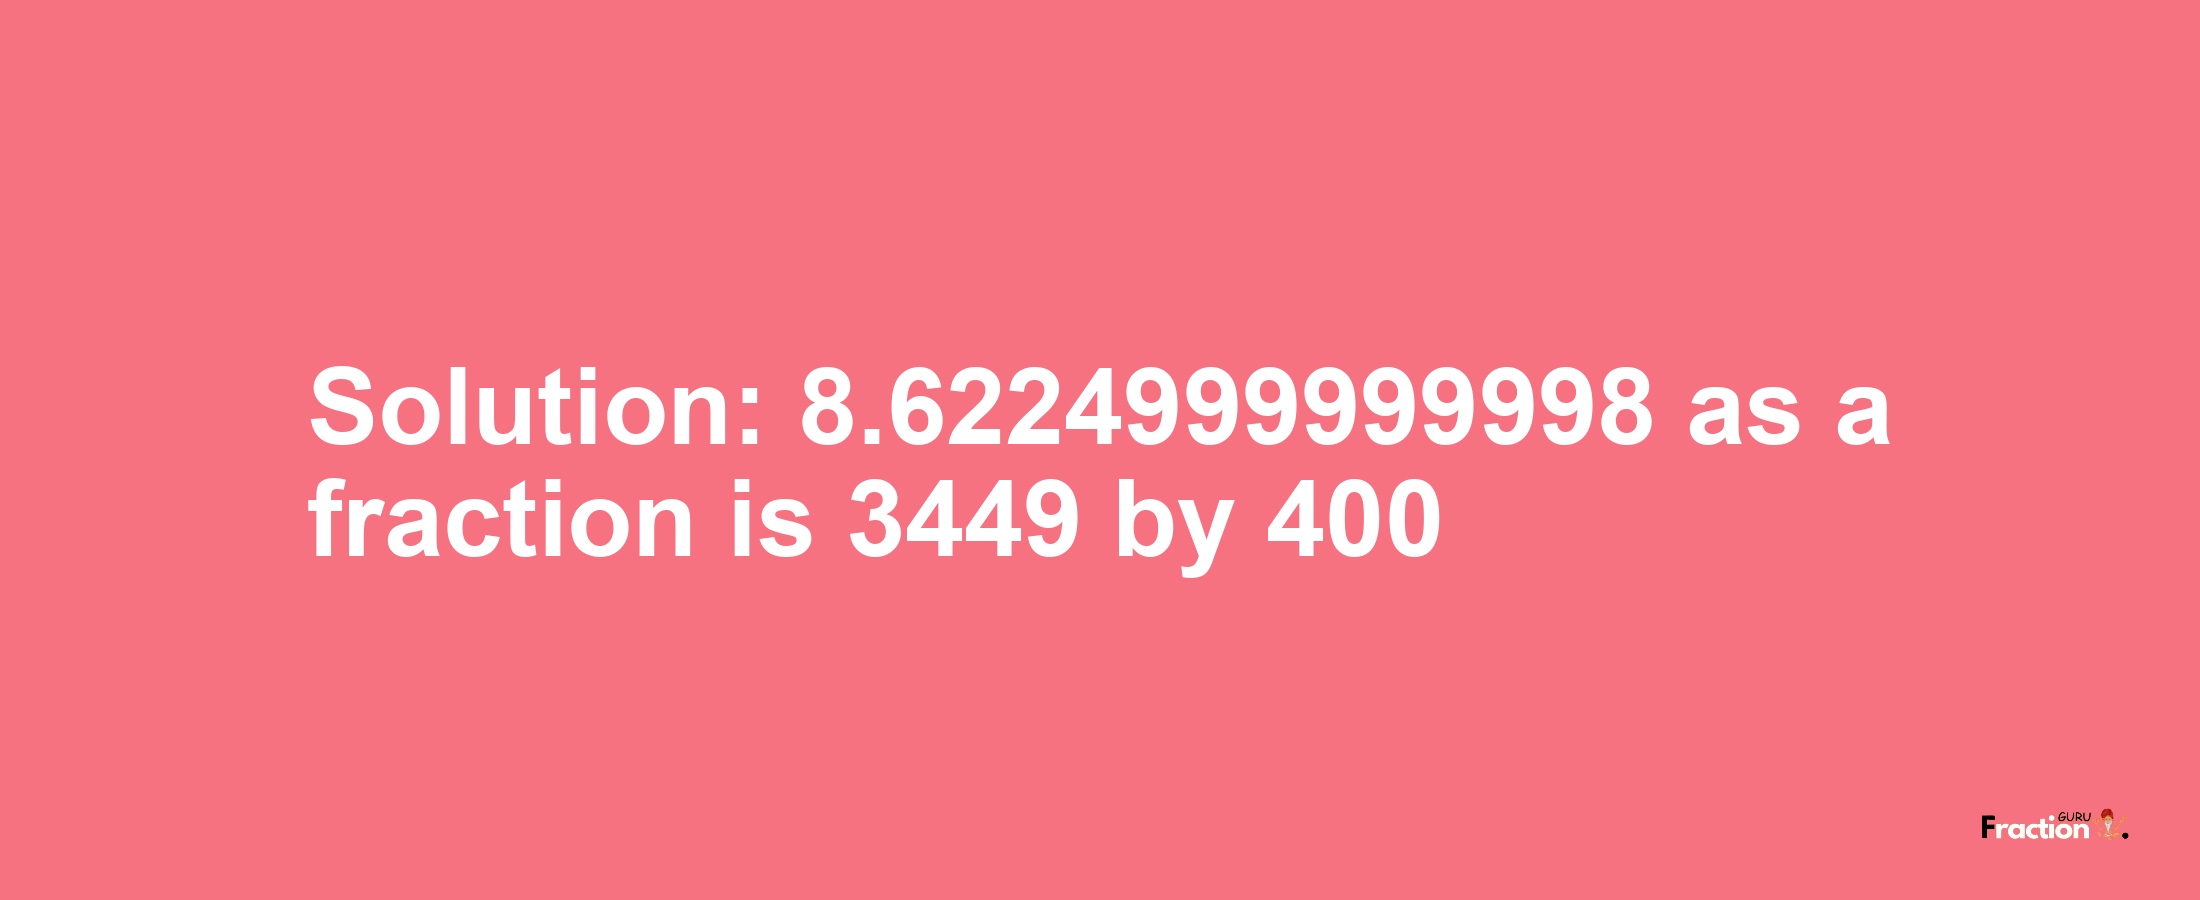 Solution:8.6224999999998 as a fraction is 3449/400